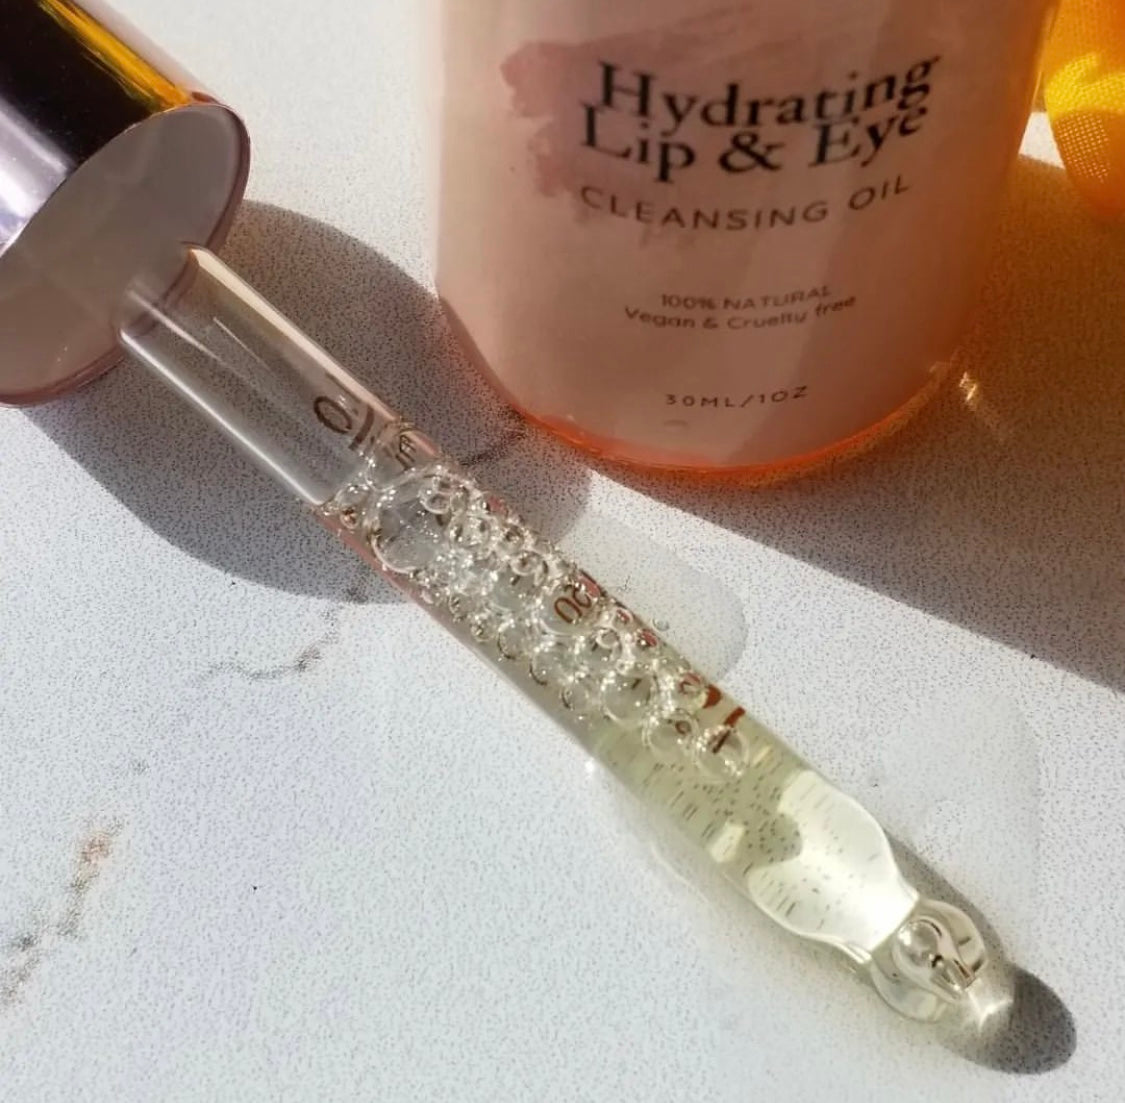 Hydrating Lip & Eye Make-Up Cleansing Oil